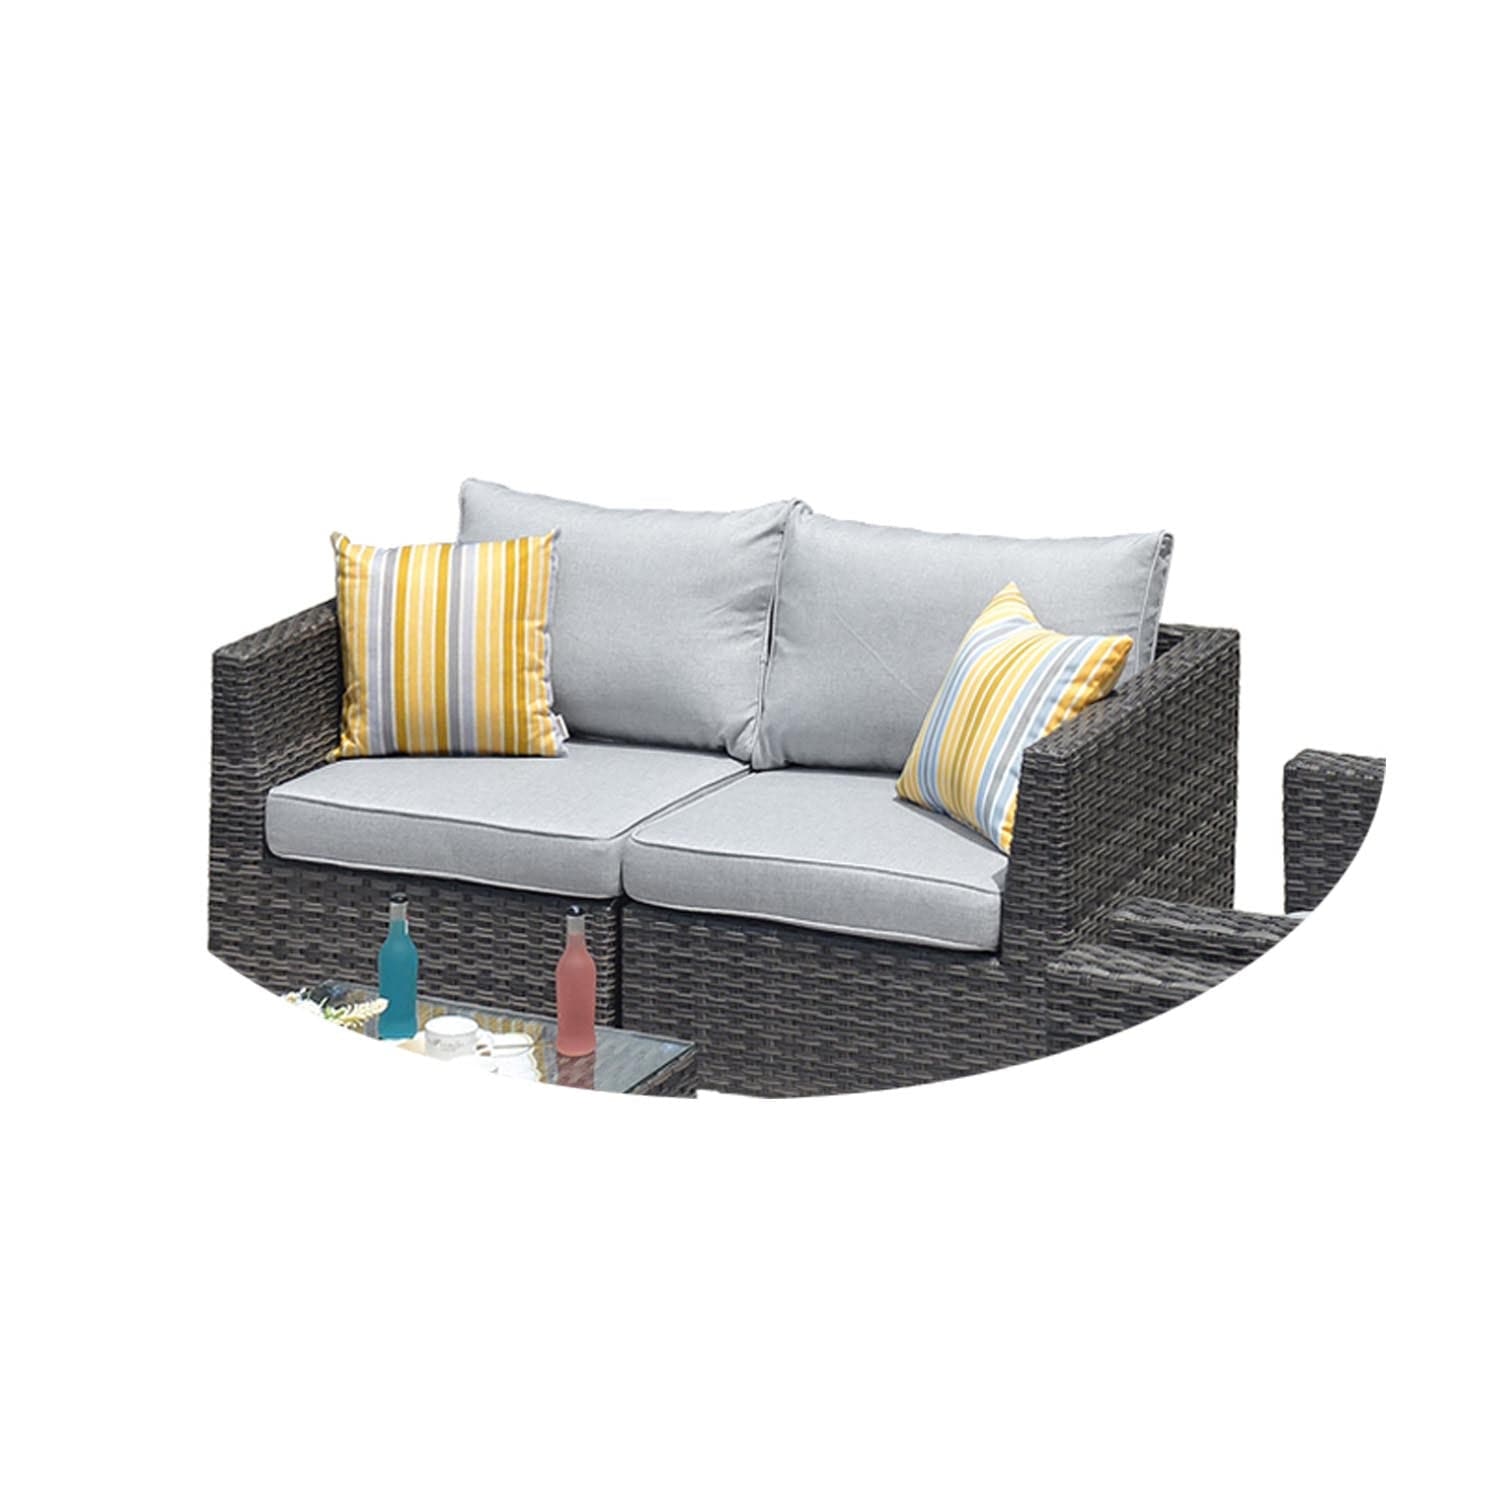 Ovios Patio Furniture Set Bigger Size 3-Piece Couch with Table, King Series, Fully Assembled